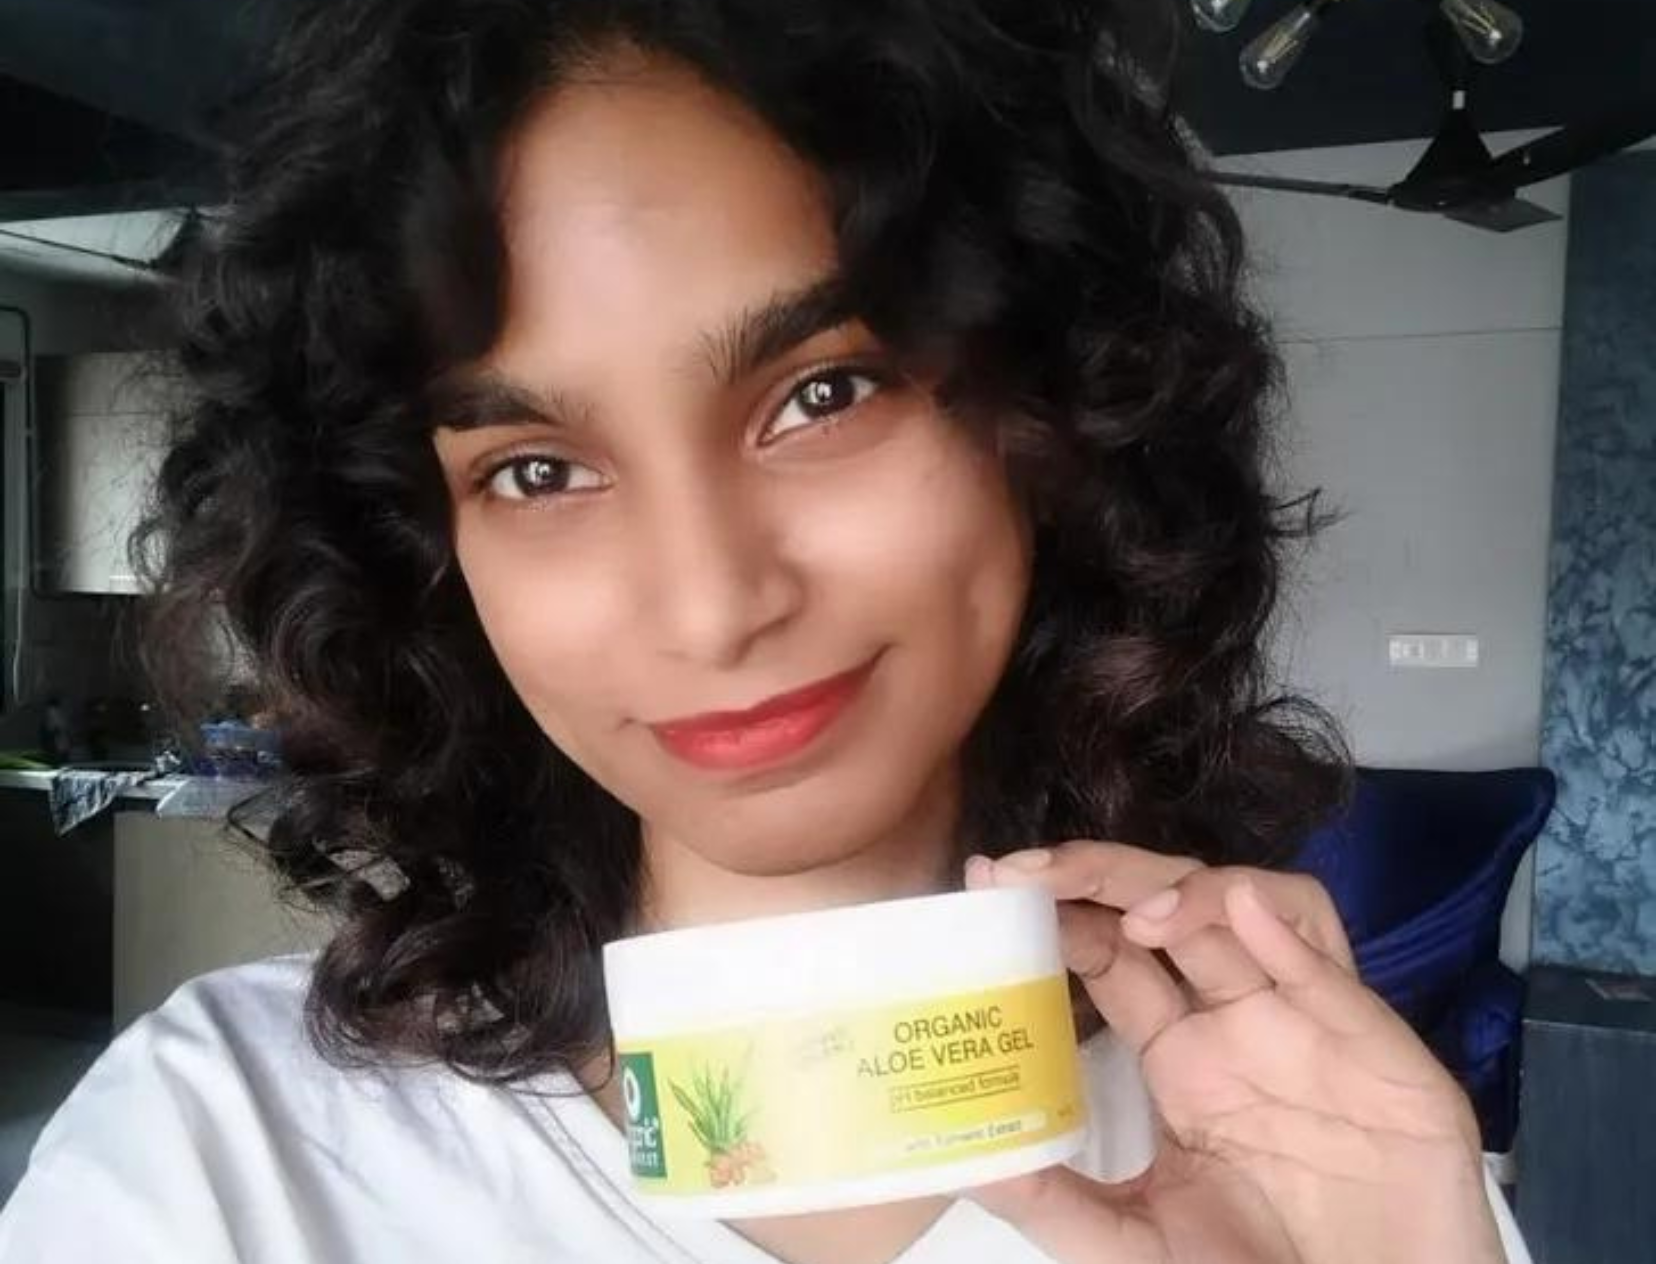 This Organic Aloe Vera Gel With Turmeric Extract Is The Fusion Skincare Product Of My Dreams